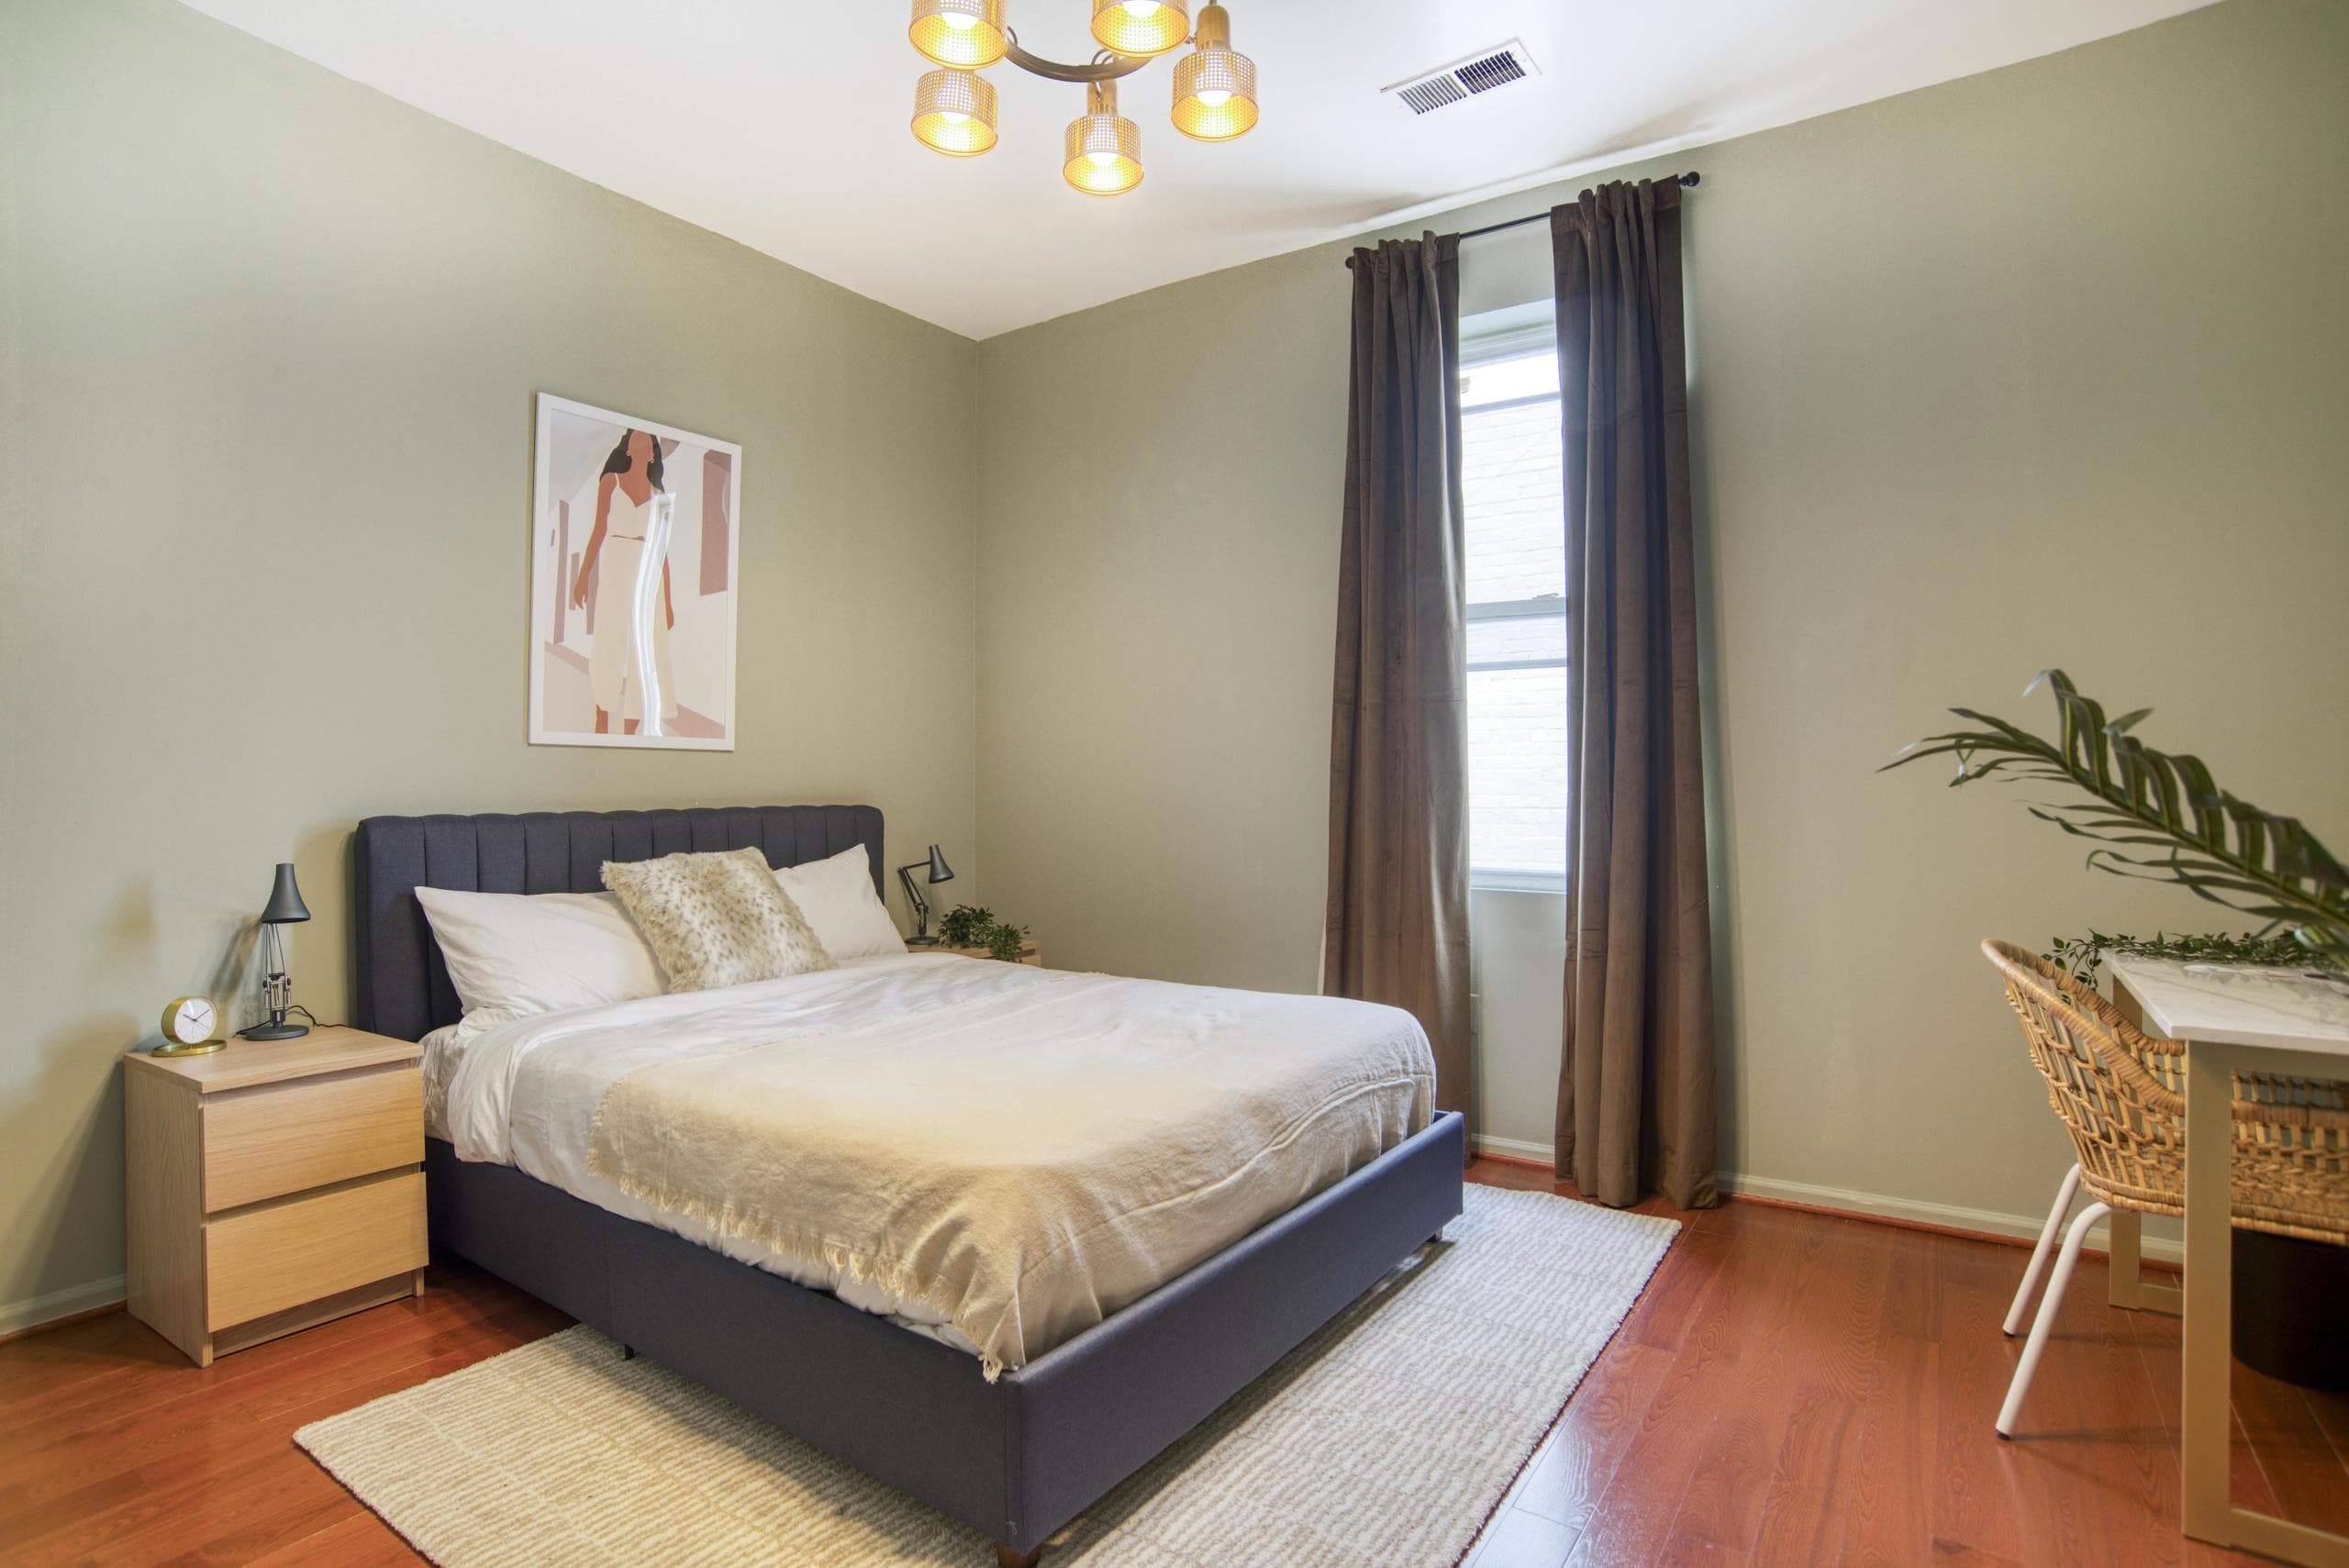 Photo 9 of #753: Queen Bedroom A at June Homes